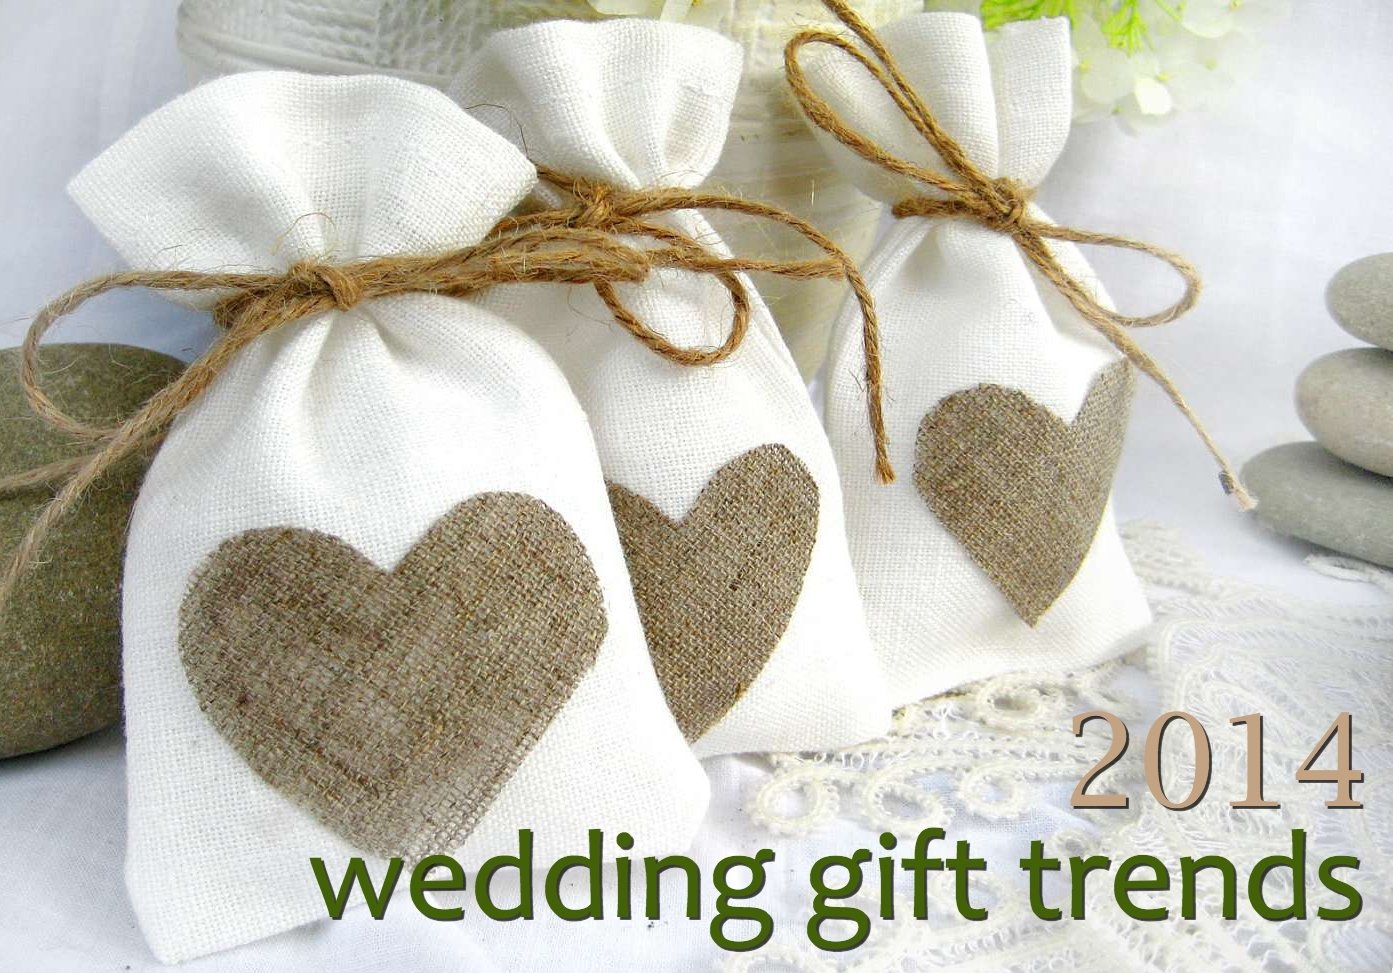 10 Unique Wedding Gift Ideas For Guests wedding gift trends for 2014 the excited bride denver bridal blog 2023